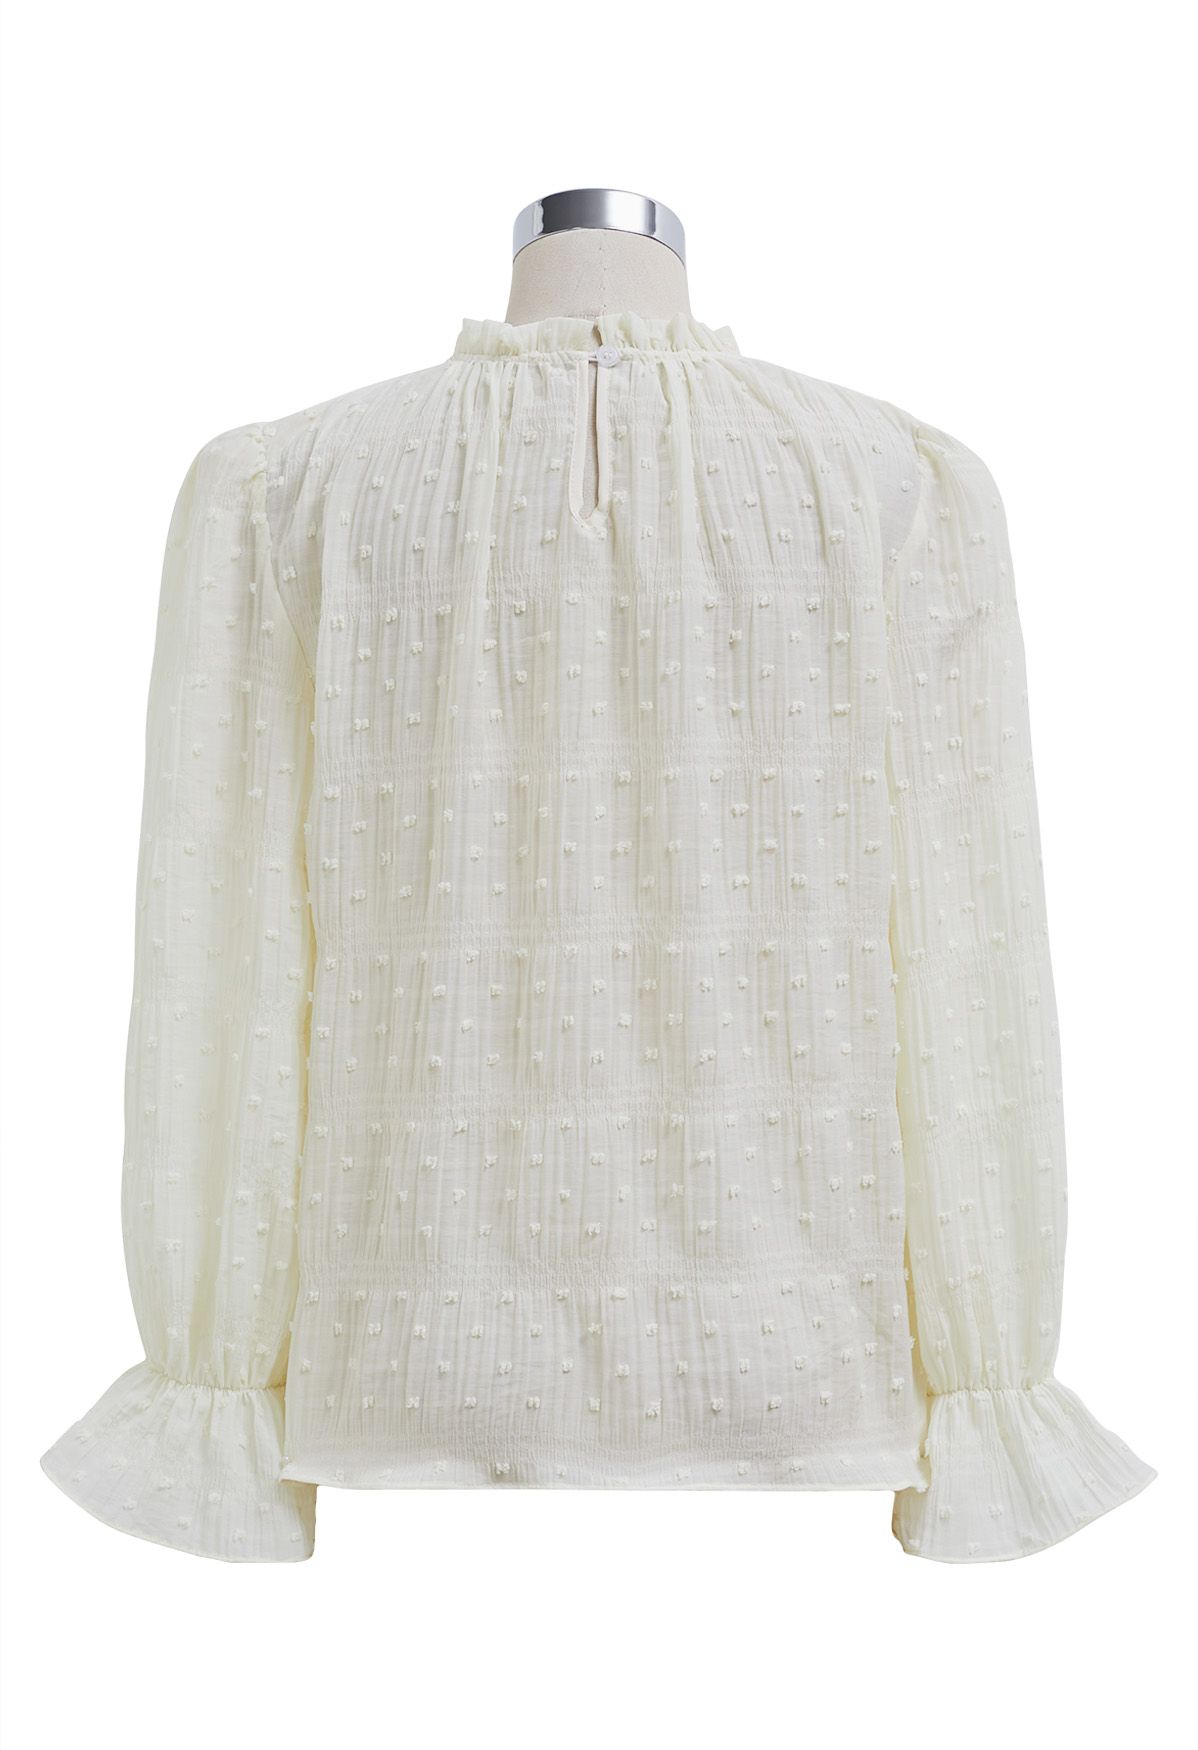 Flock Dot Trim Puff Sleeves Top in Light Yellow